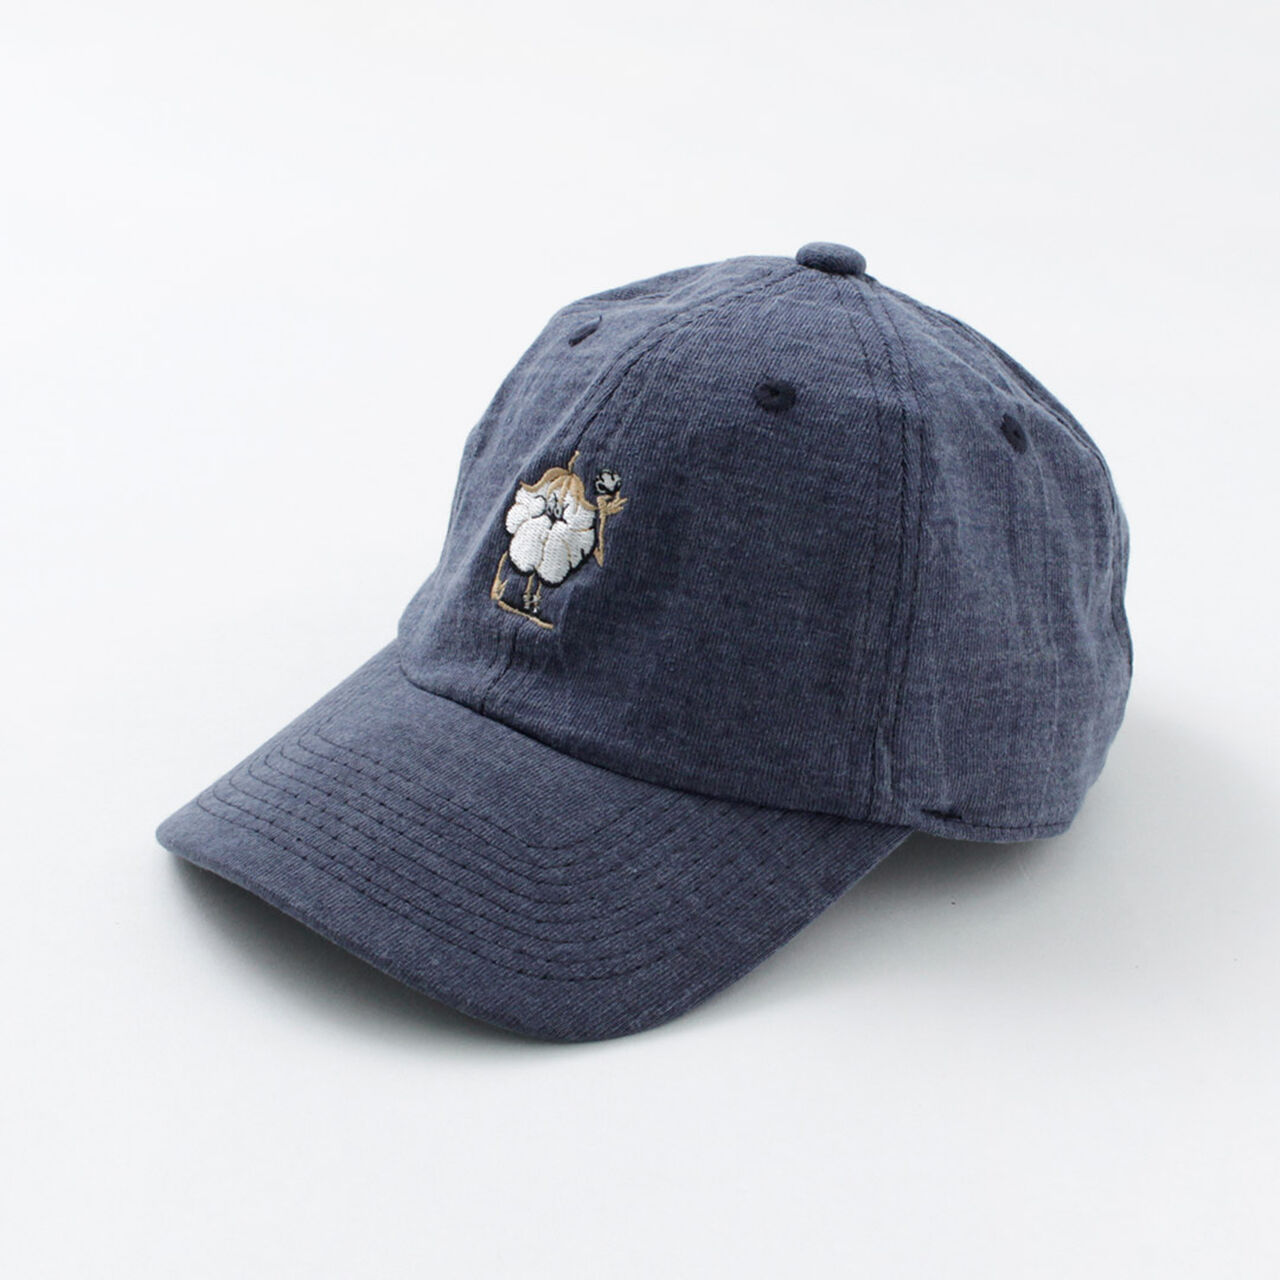 Cotton Monster Cap,P-Navy, large image number 0